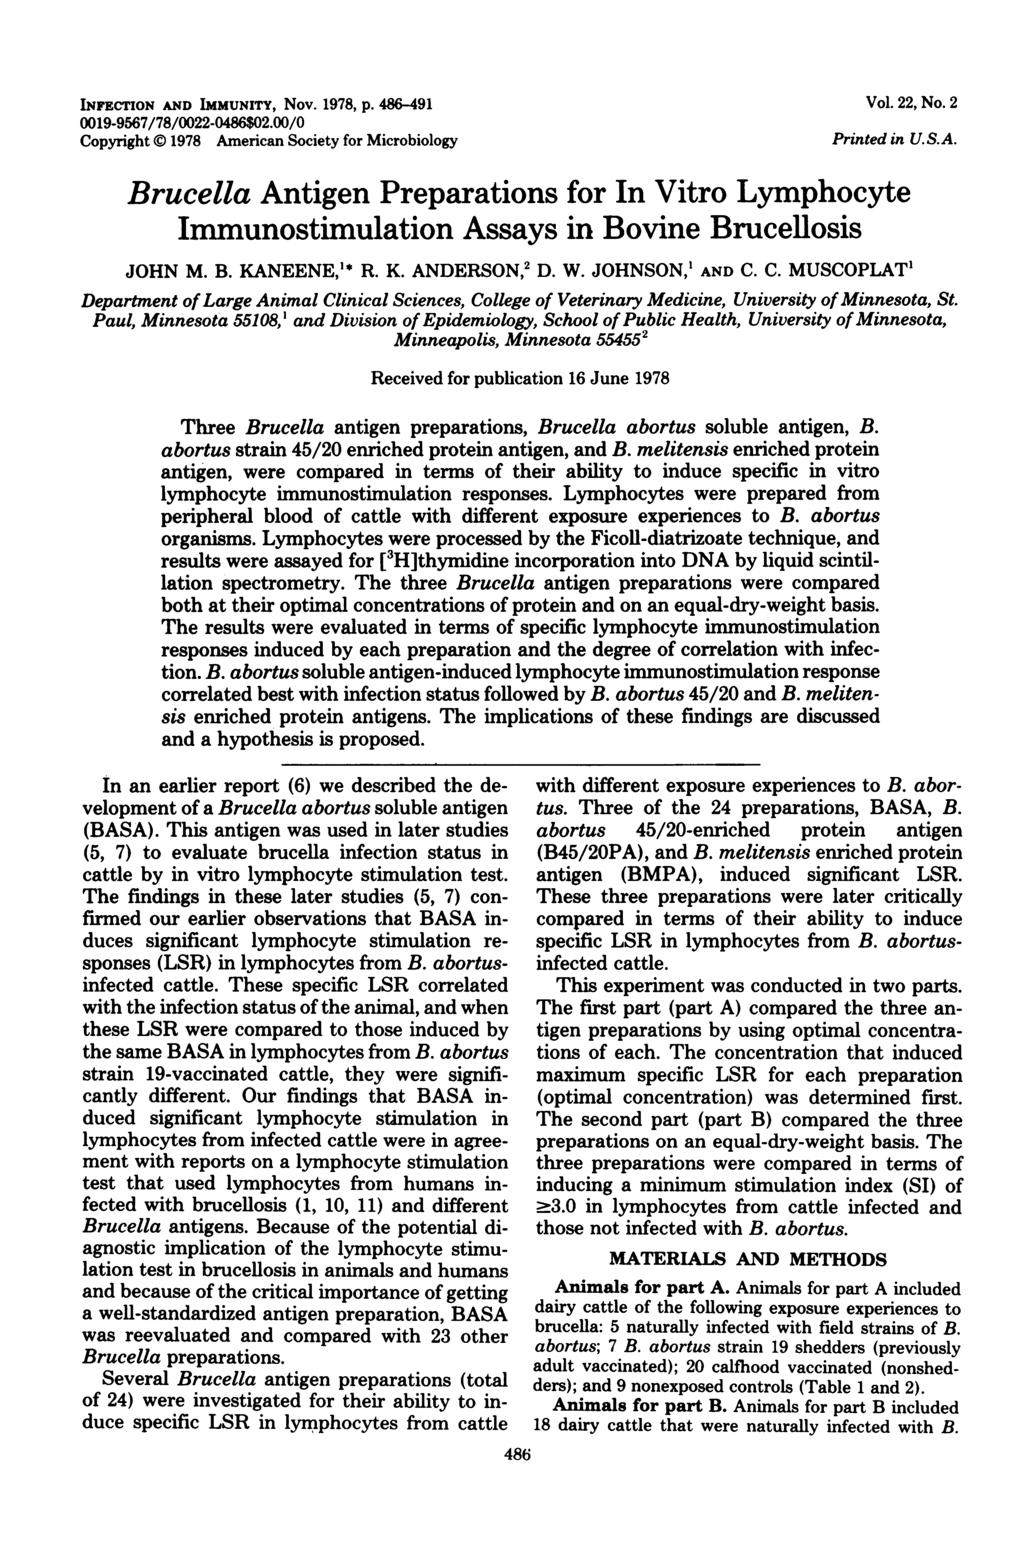 INFECTION AND IMMUNITY, Nov. 1978, p. 486-491 0019-9567/78/0022-0486$02.00/0 Copyright i 1978 Americn Society for Microbiology Vol. 22, No. 2 Printed in U.S.A. Brucell Antigen Preprtions for In Vitro Lymphocyte Immunostimultion Assys in Bovine Brucellosis JOHN M.